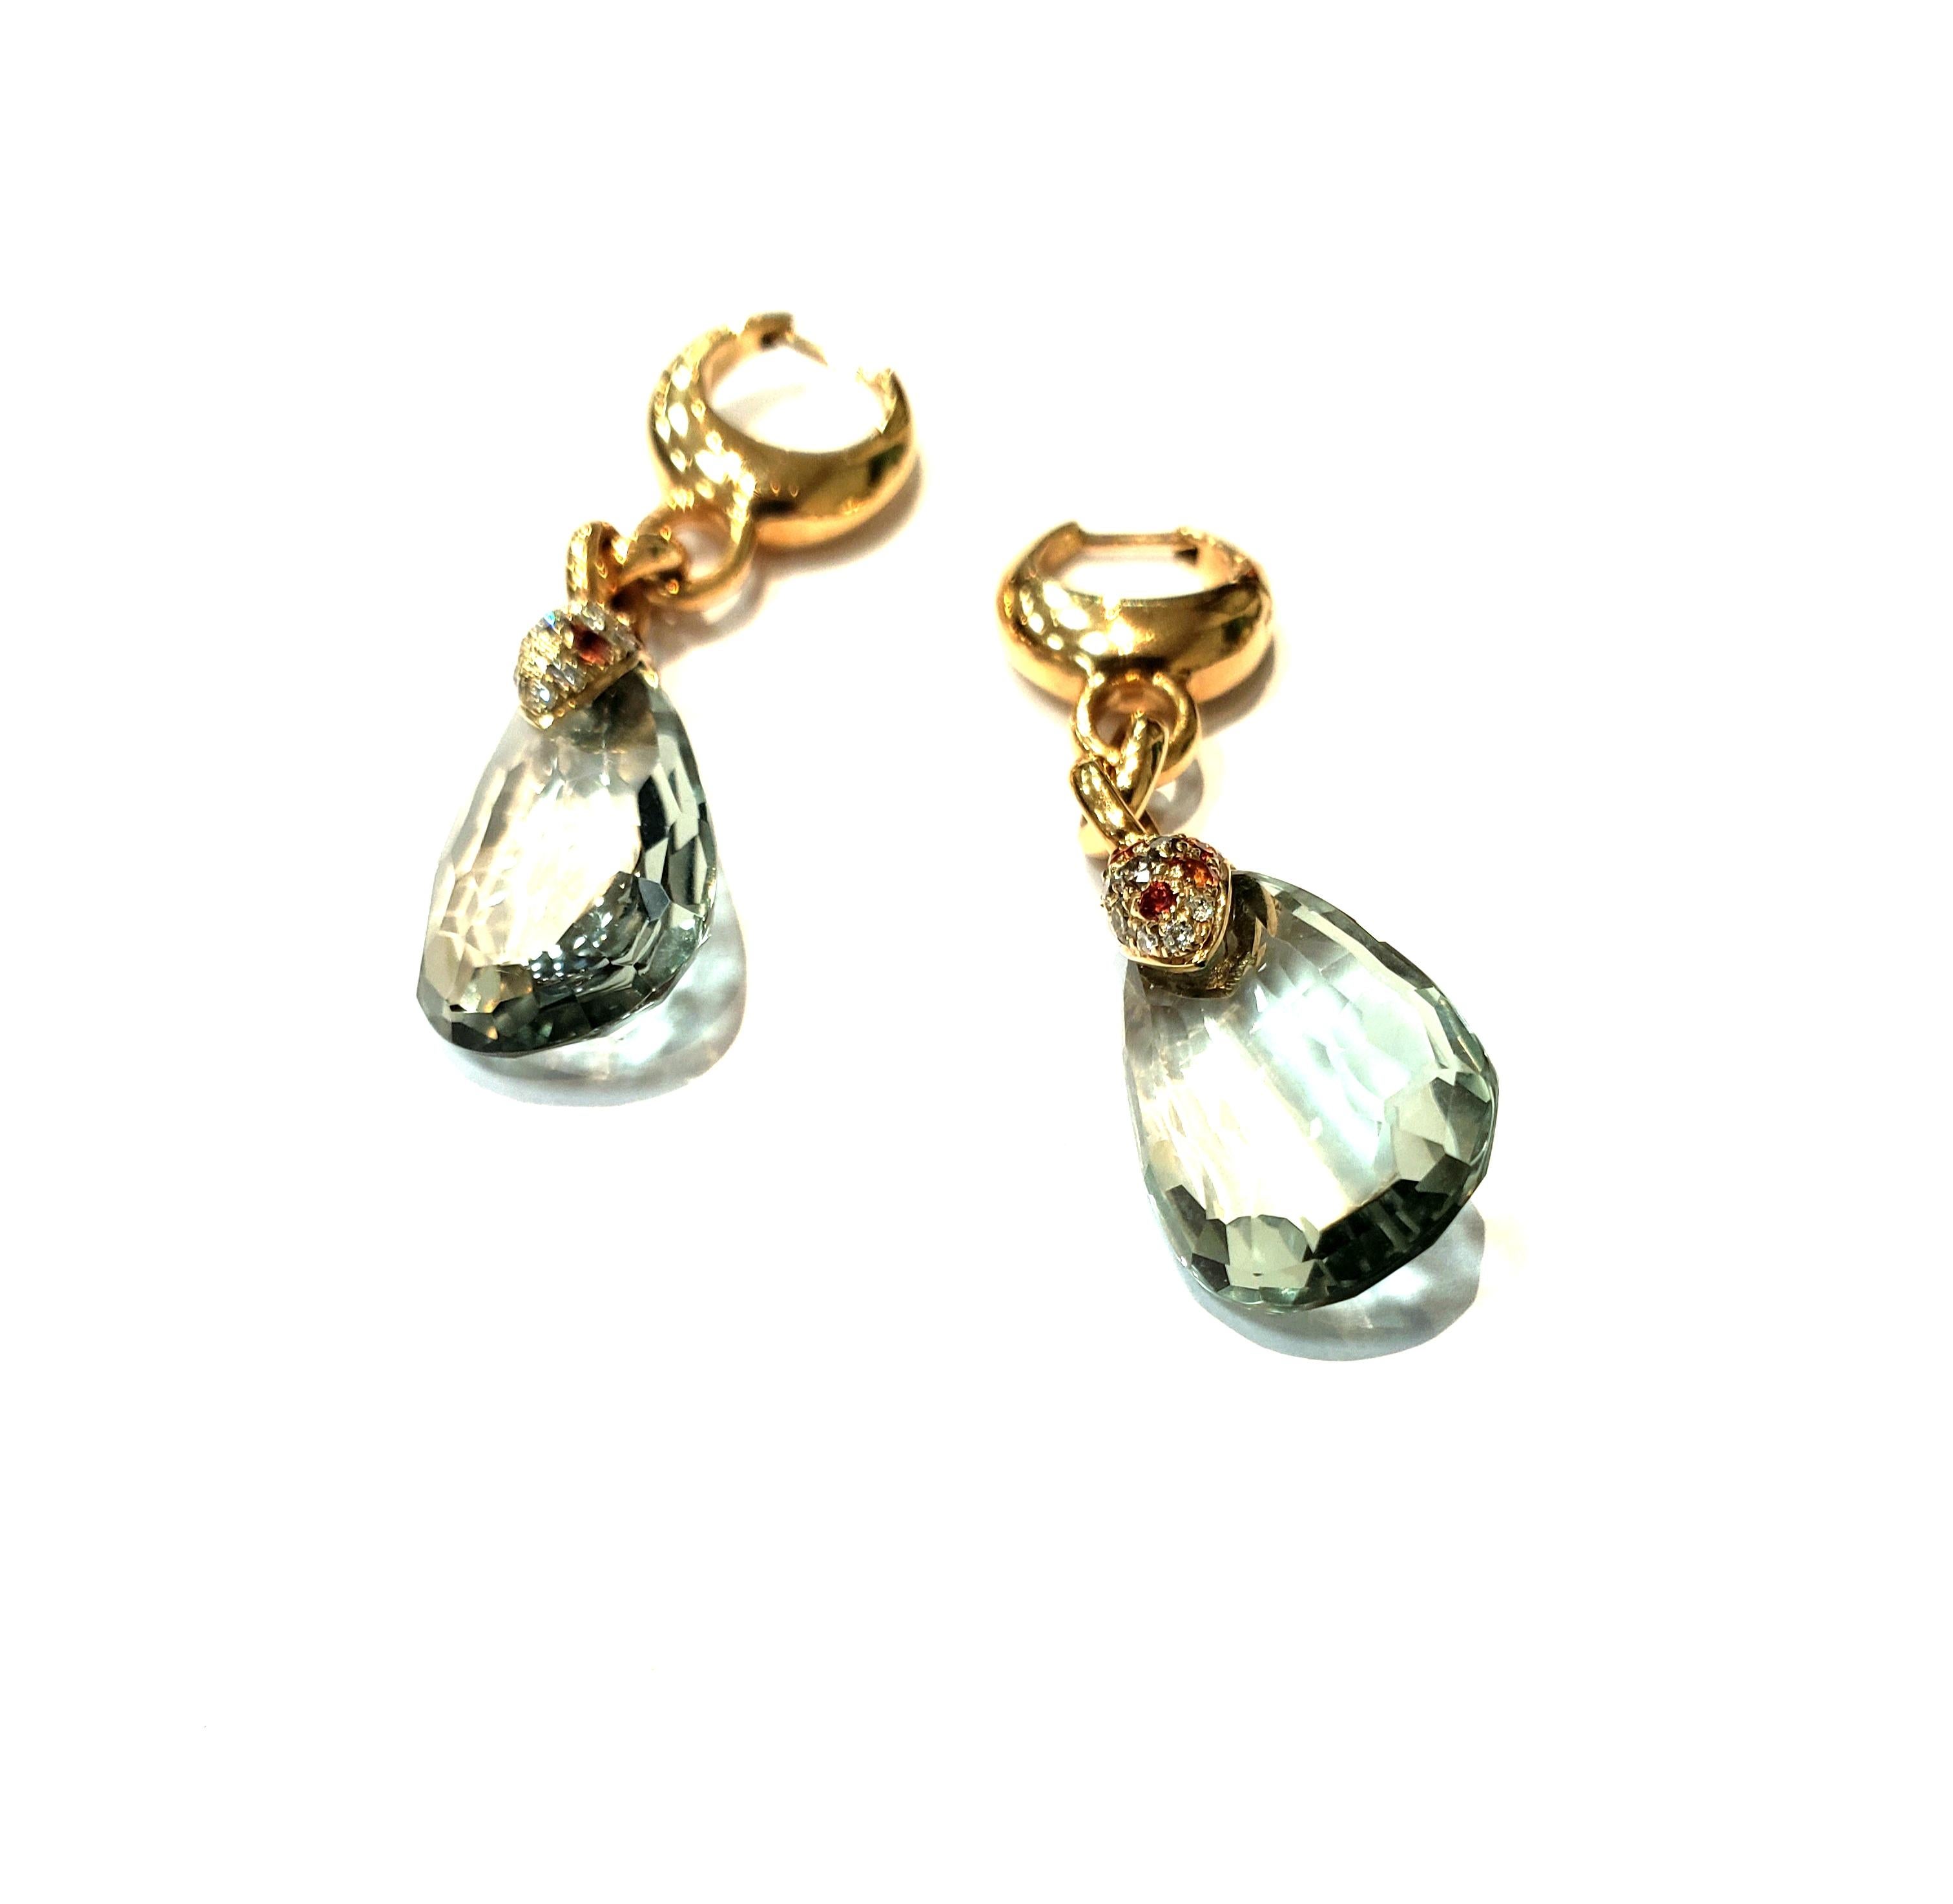 18 Karat Gold Earrings With Faceted Prasiolite Drops From The 